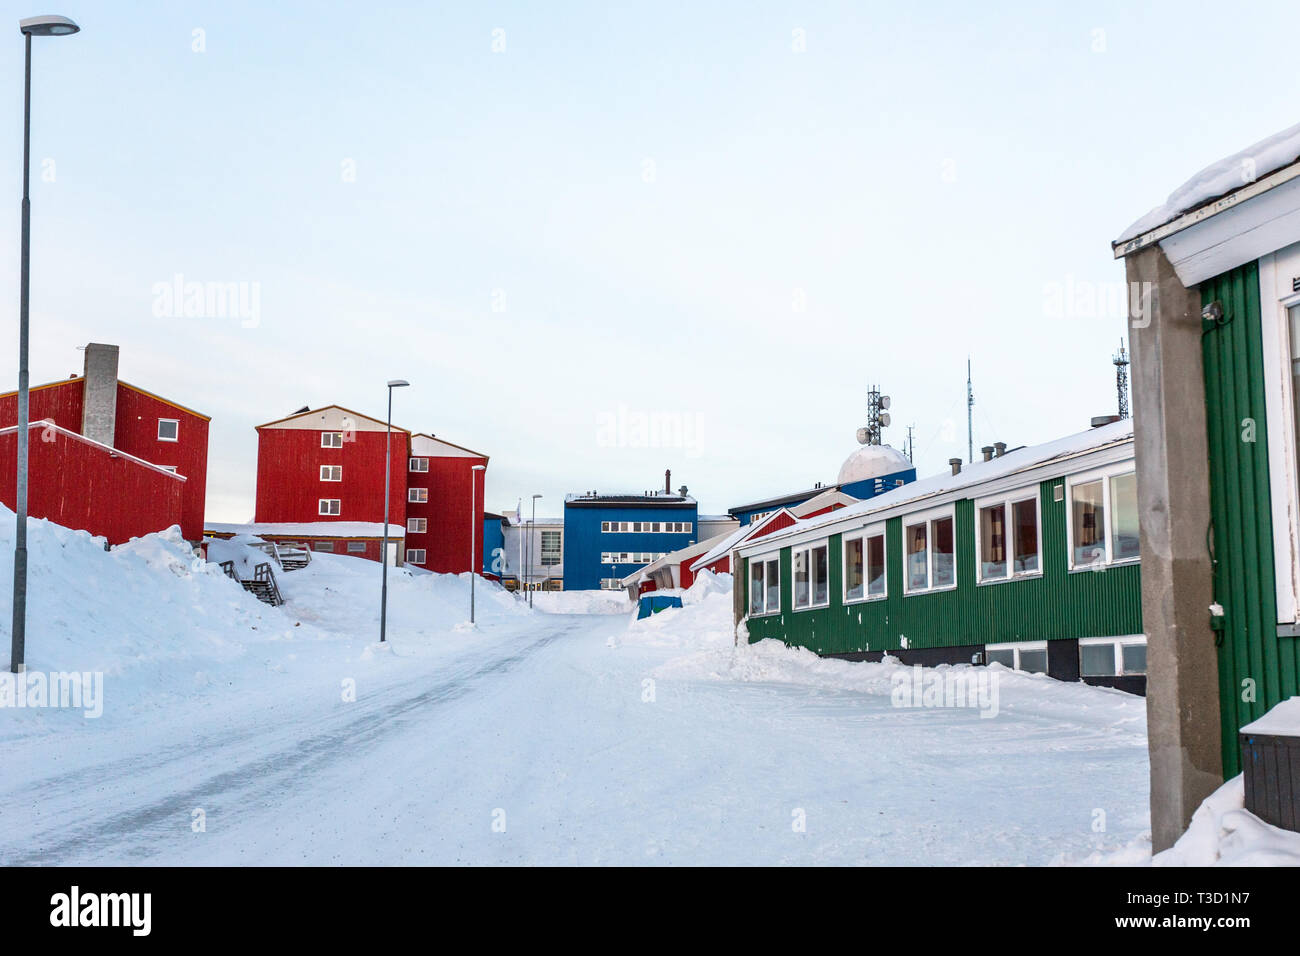 Greenlandic street covered in snow with colorful buildings, Nuuk city center, Greenland Stock Photo